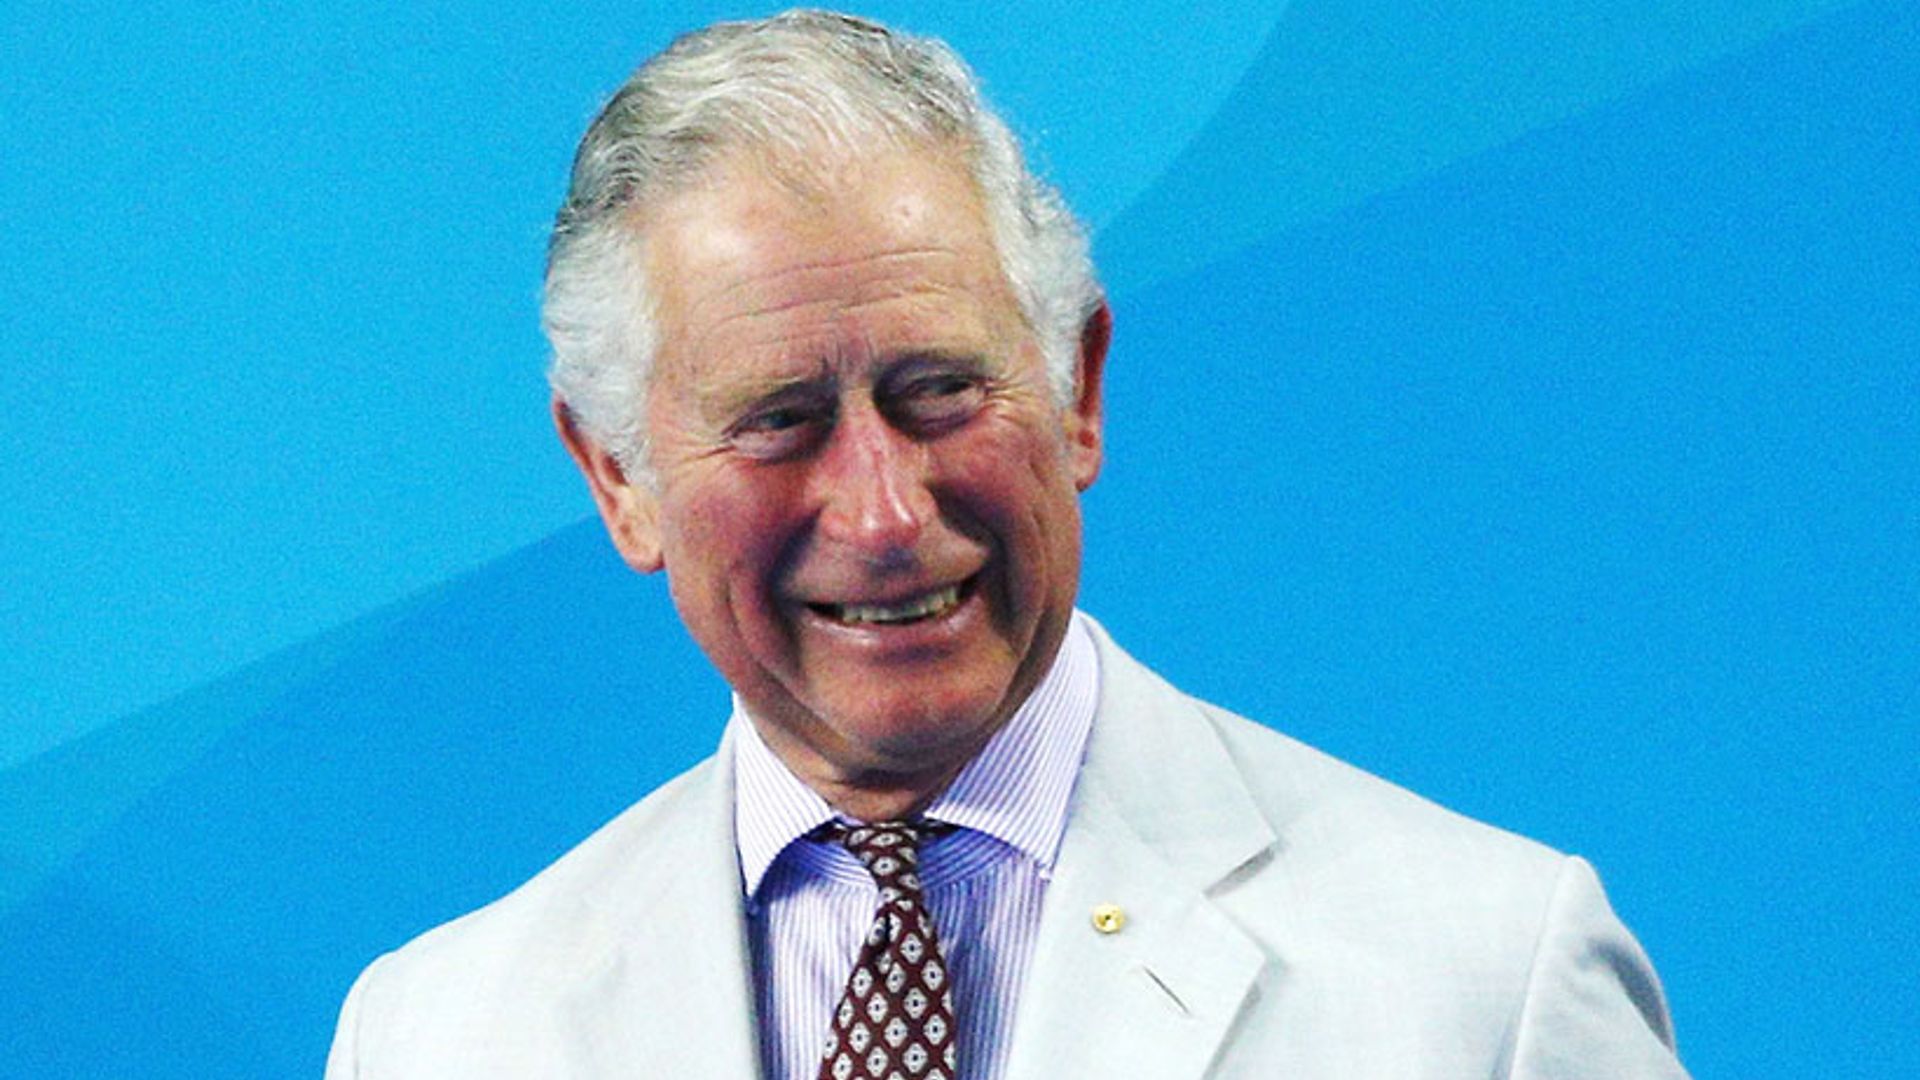 Is Prince Charles going to make a guest appearance on MasterChef?